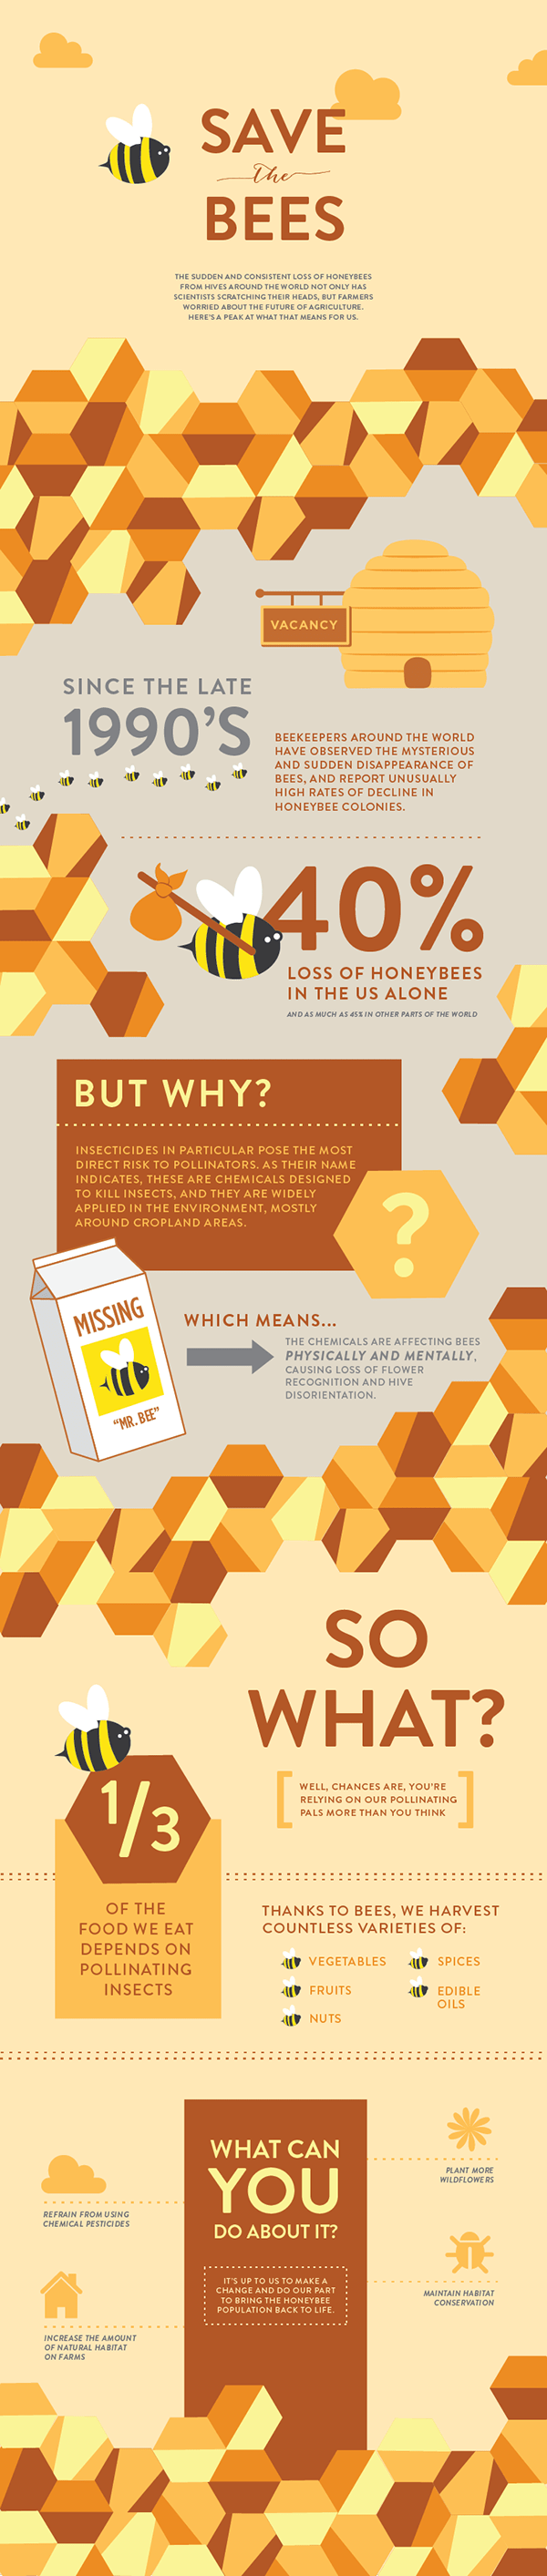 Infographic shows what is killing bees and how we should prevent that until its too late.